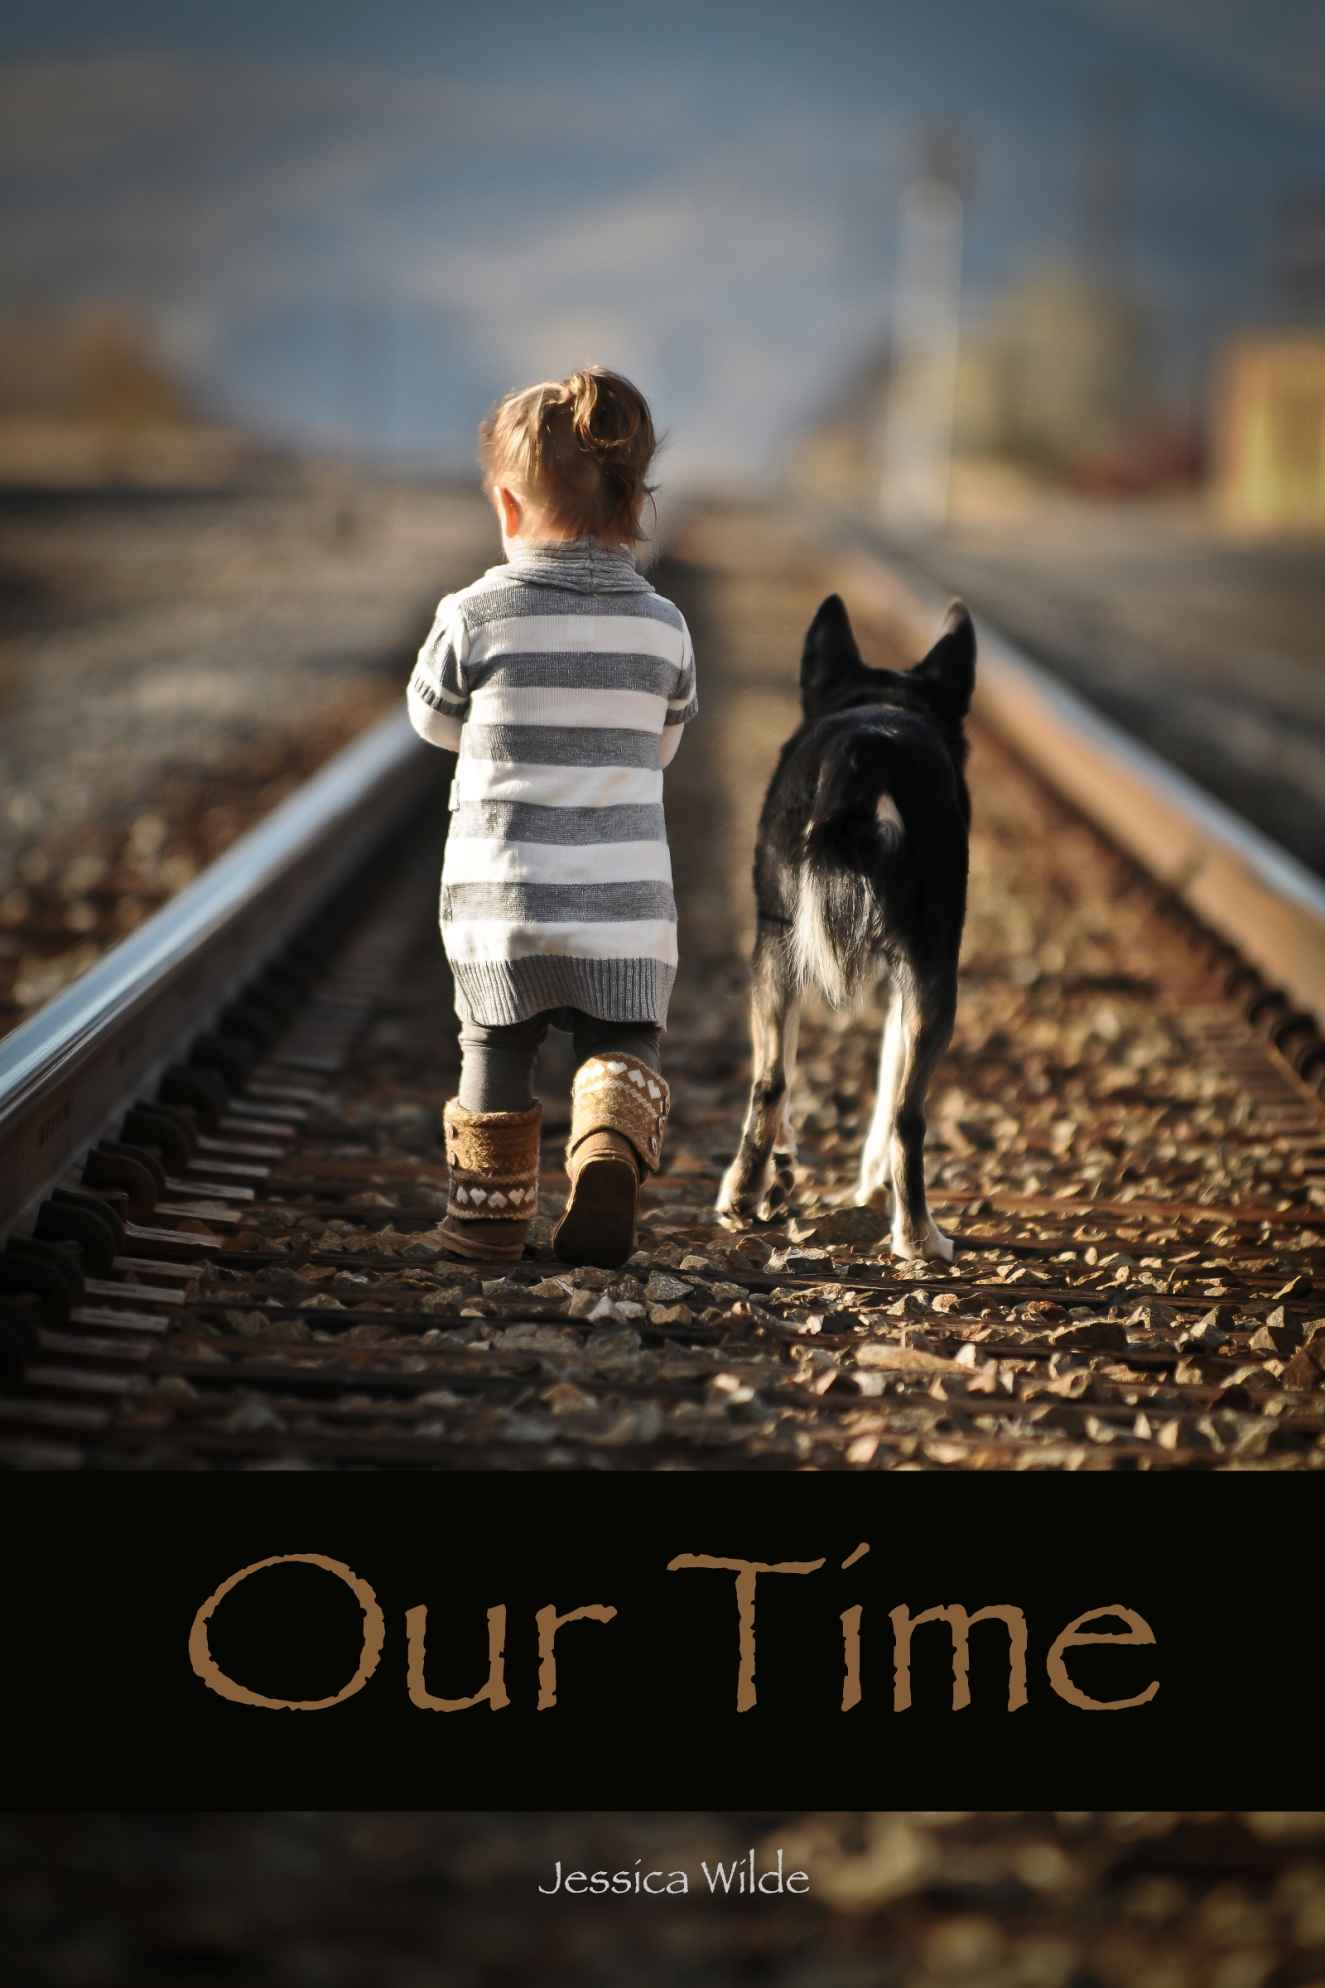 Our Time by Jessica Wilde